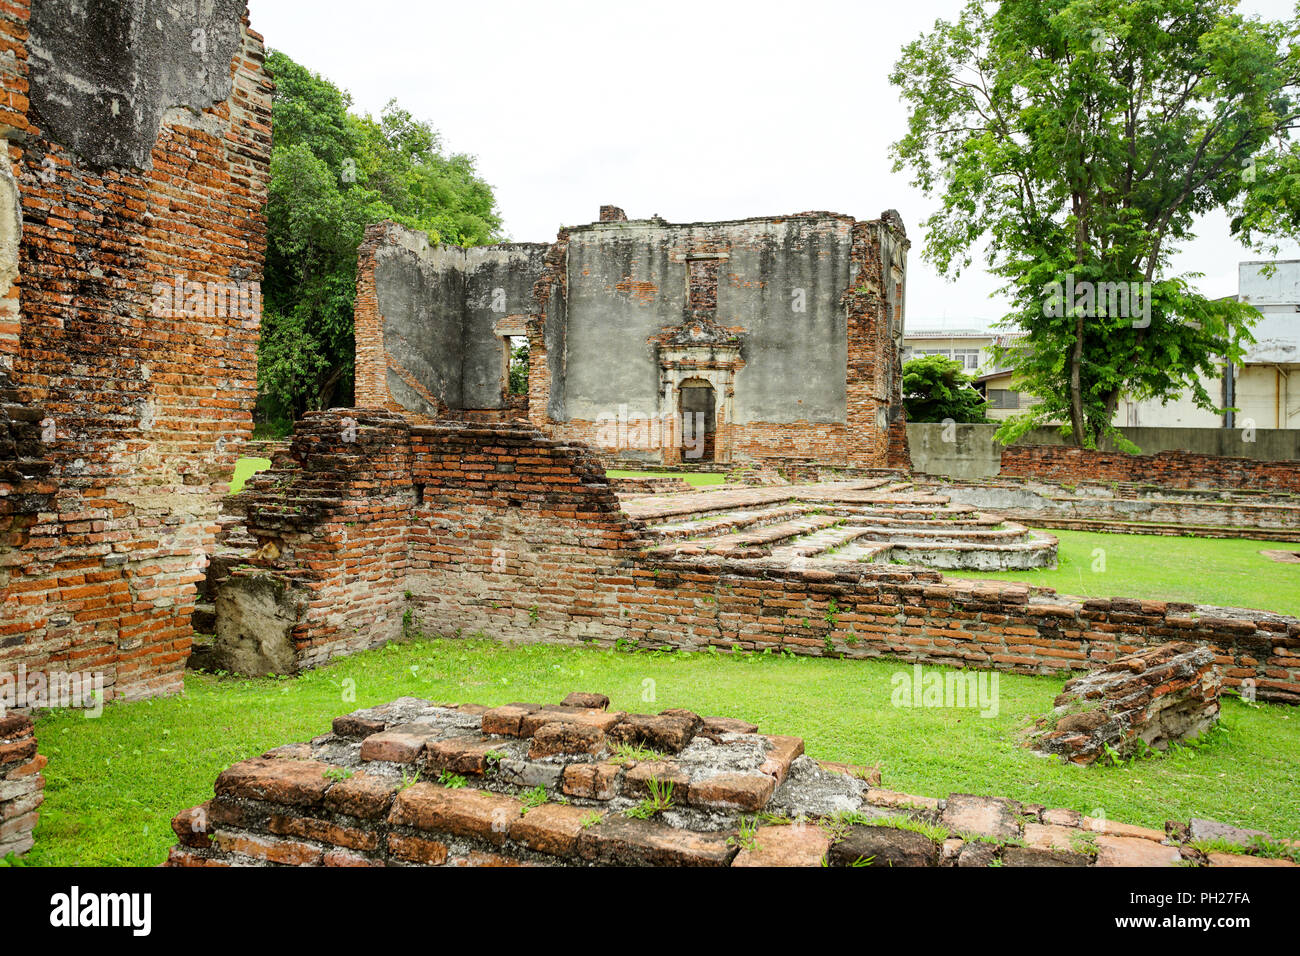 The ruined historical building Wichayen House in Lopburi Province, Thailand Stock Photo